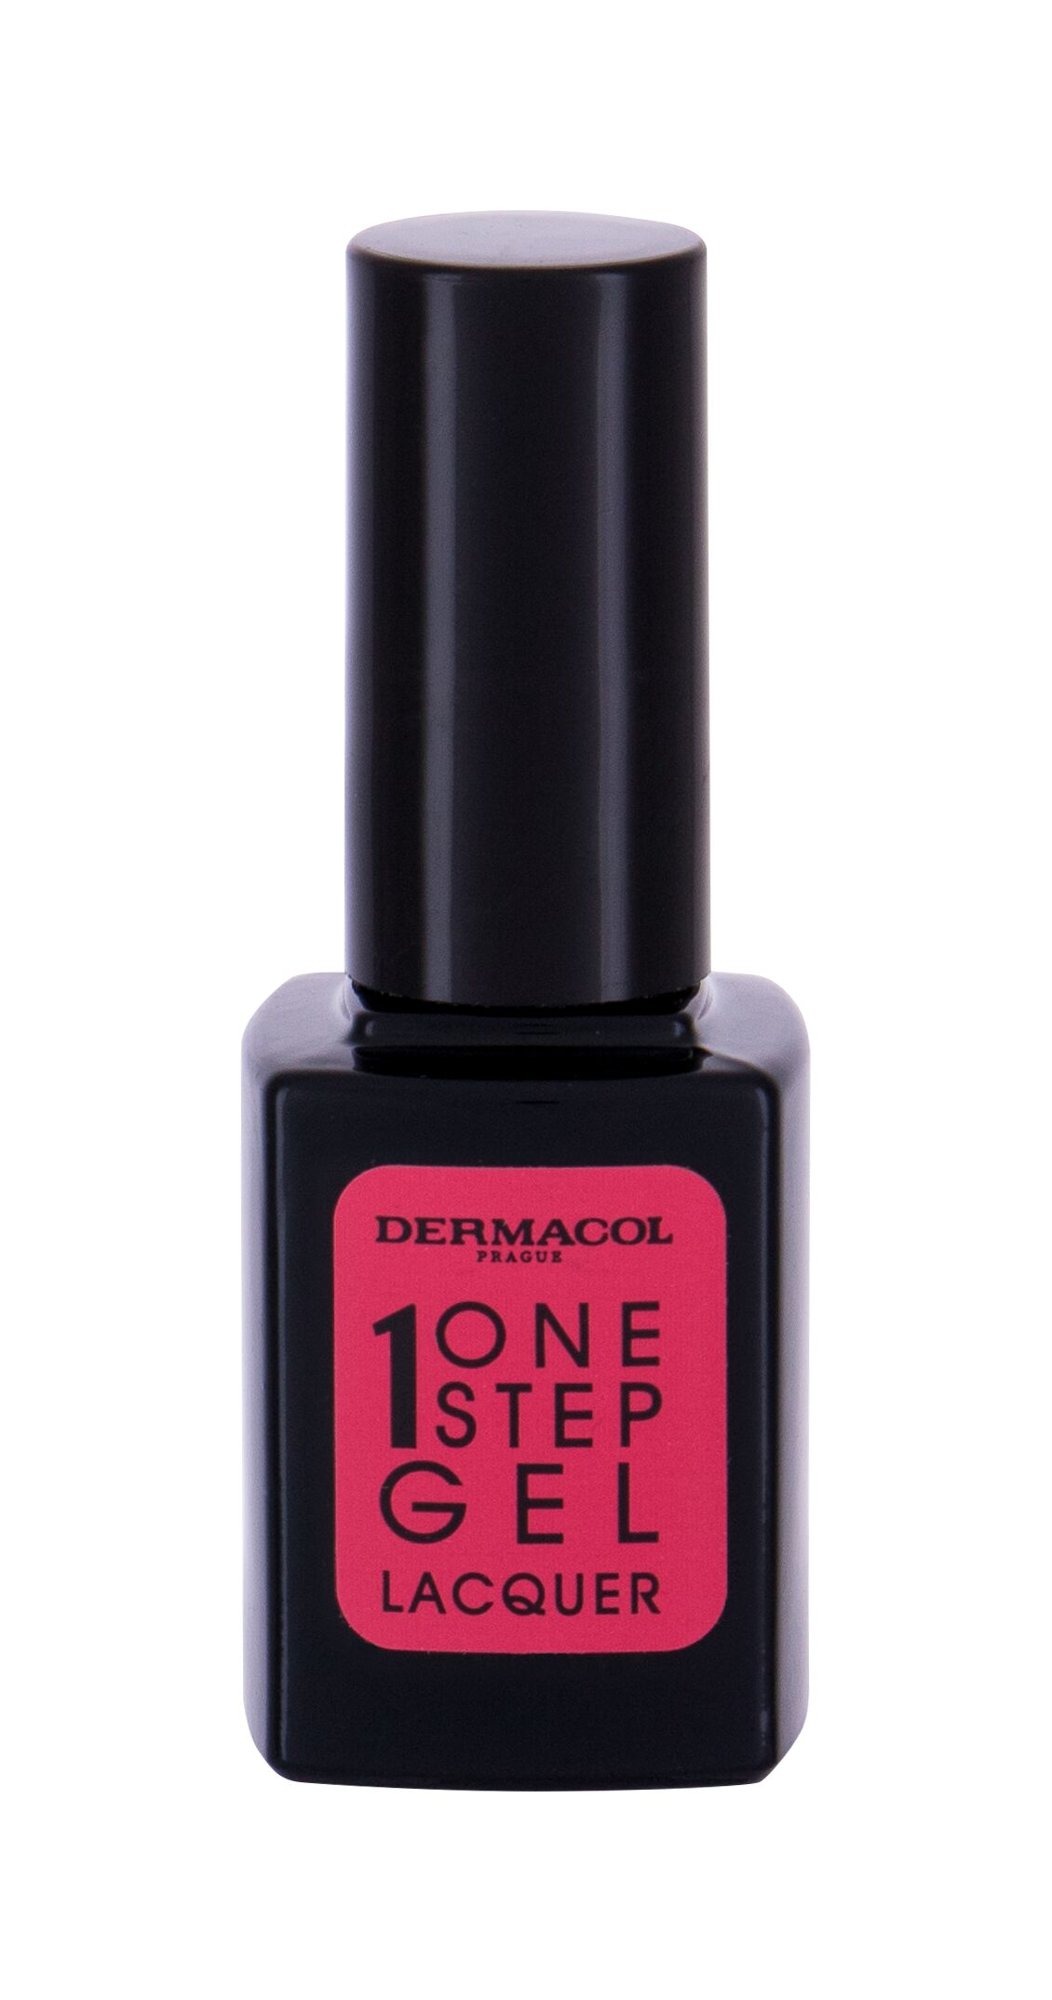 Dermacol One Step Gel Lacquer nagų lakas